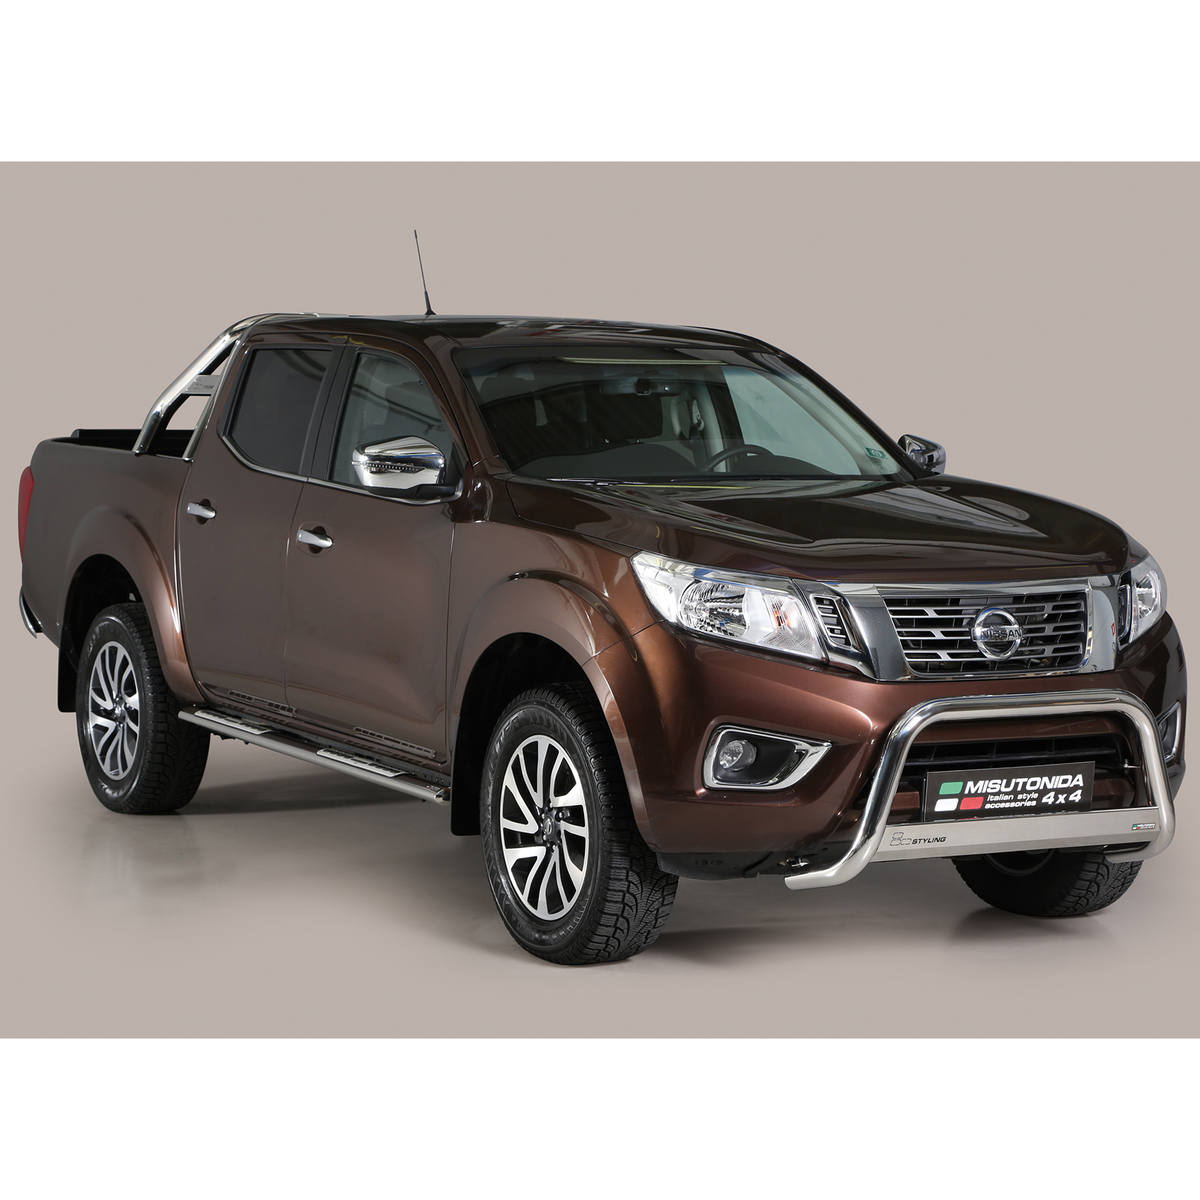 Nissan Navara Np300 2016 On Misutonida Eu Approved Front A-bar - 63mm - Stainless Finish